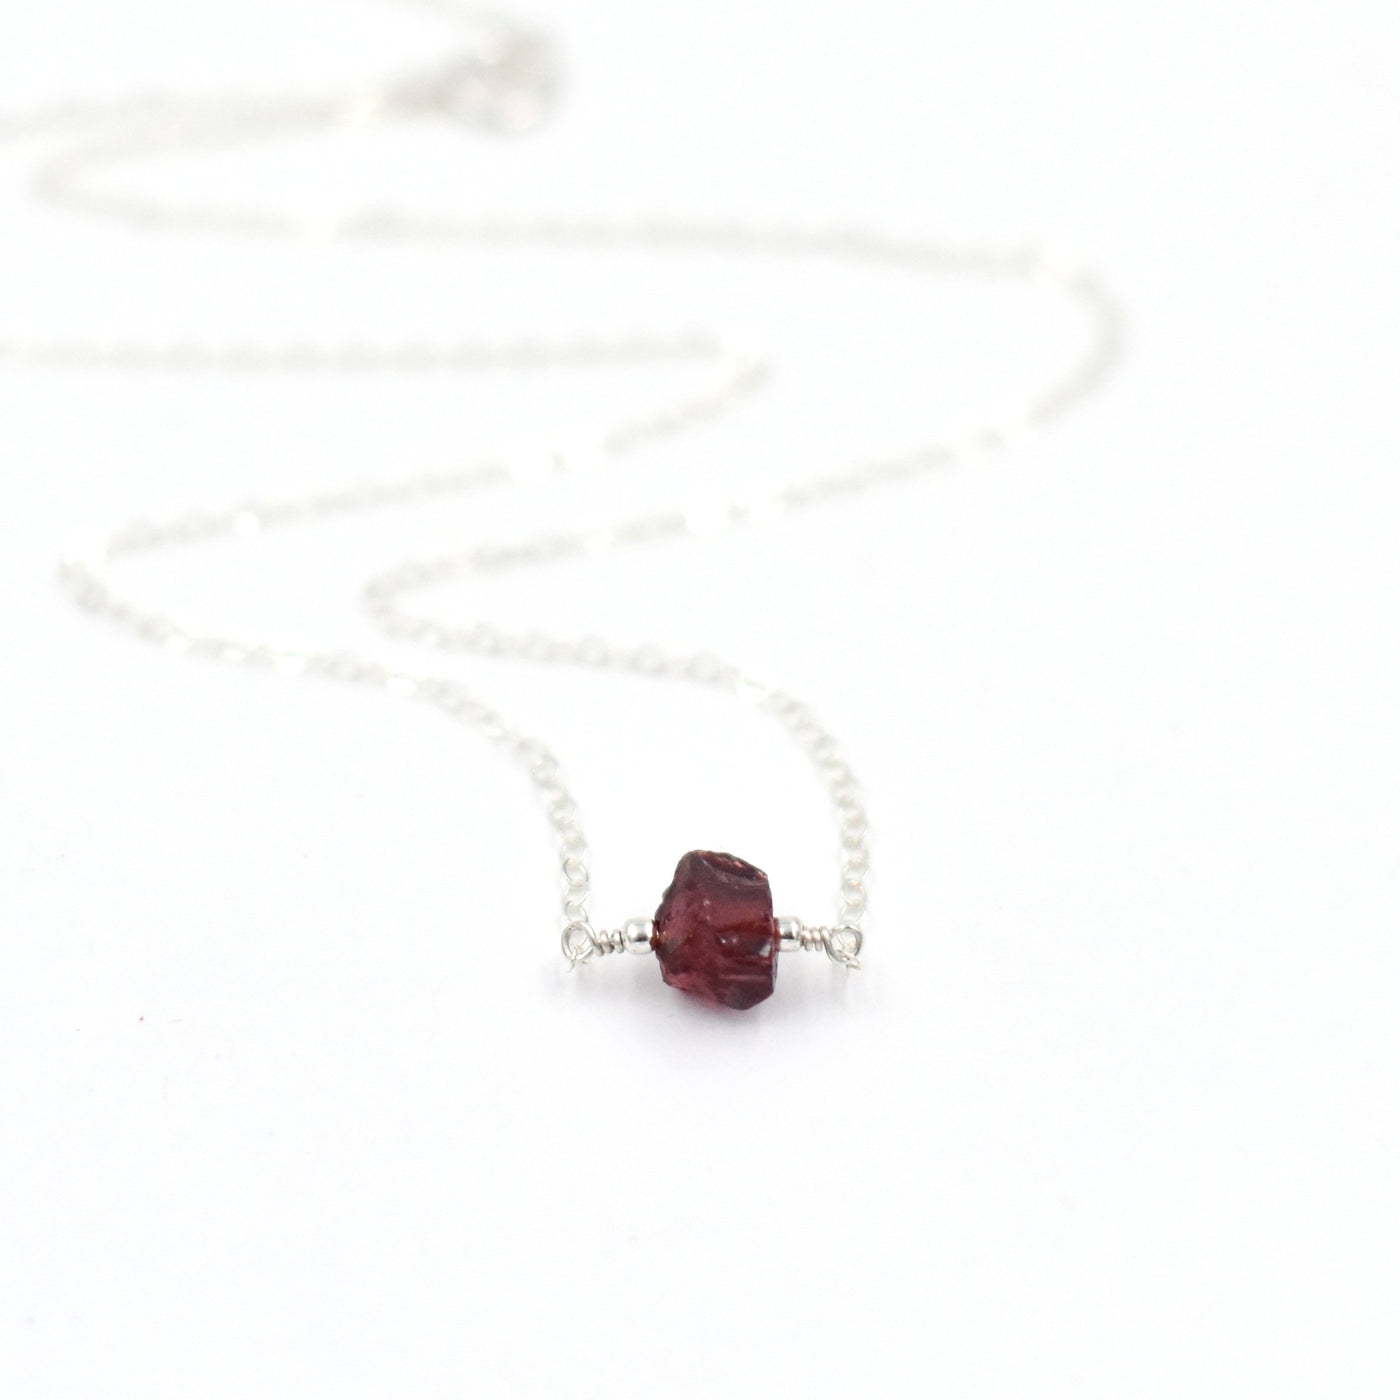 Topaz & Pearl Necklaces Sterling Silver / Single Garnet Organic Stone Necklace